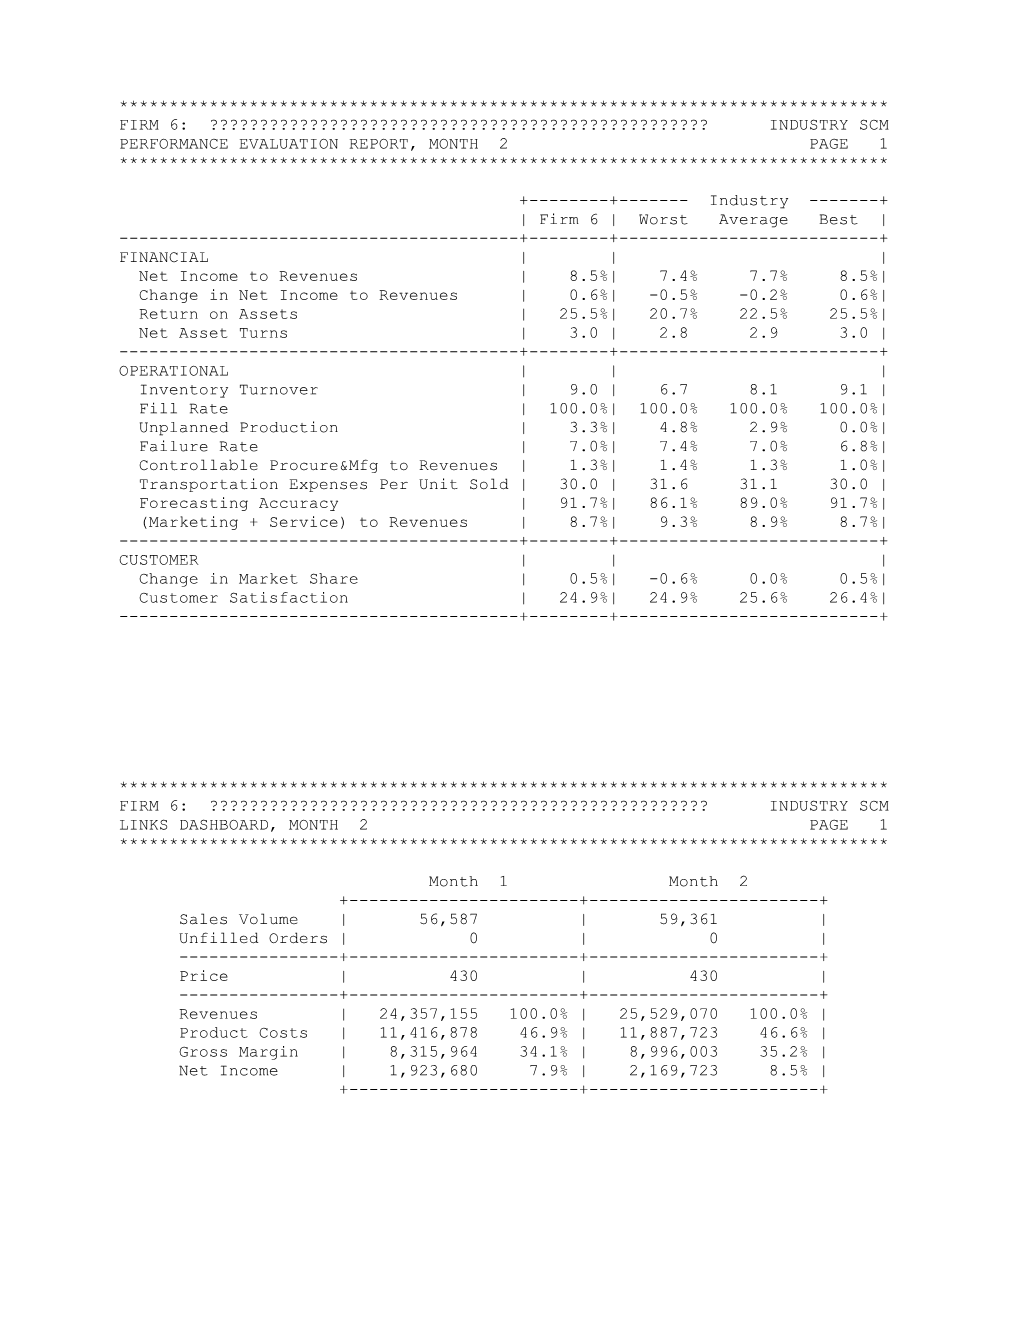 Performance Evaluation Report, Month 2 Page 1